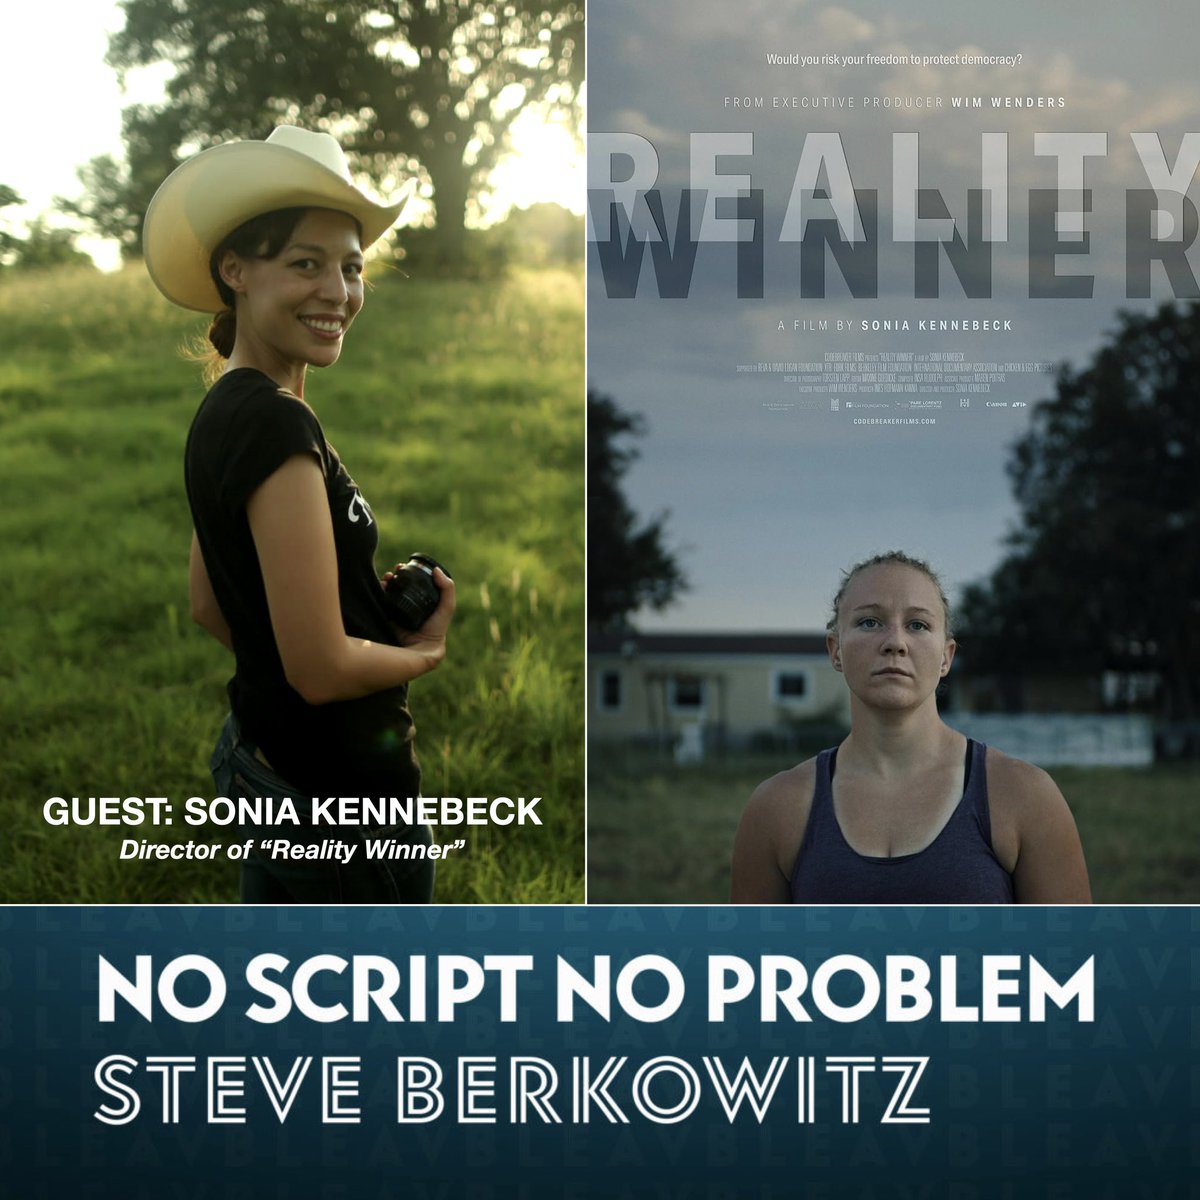 Sonia Kennebeck Discusses Her Documentary 'Reality Winner' on the No Scr... youtu.be/nZG3usBs6Hc?si… via @YouTube

@soniakennebeck @BleavNetwork #NoScriptNoProblem #podcast #RealityWinner #Documentary on #AppleTV and #AmazonPrime